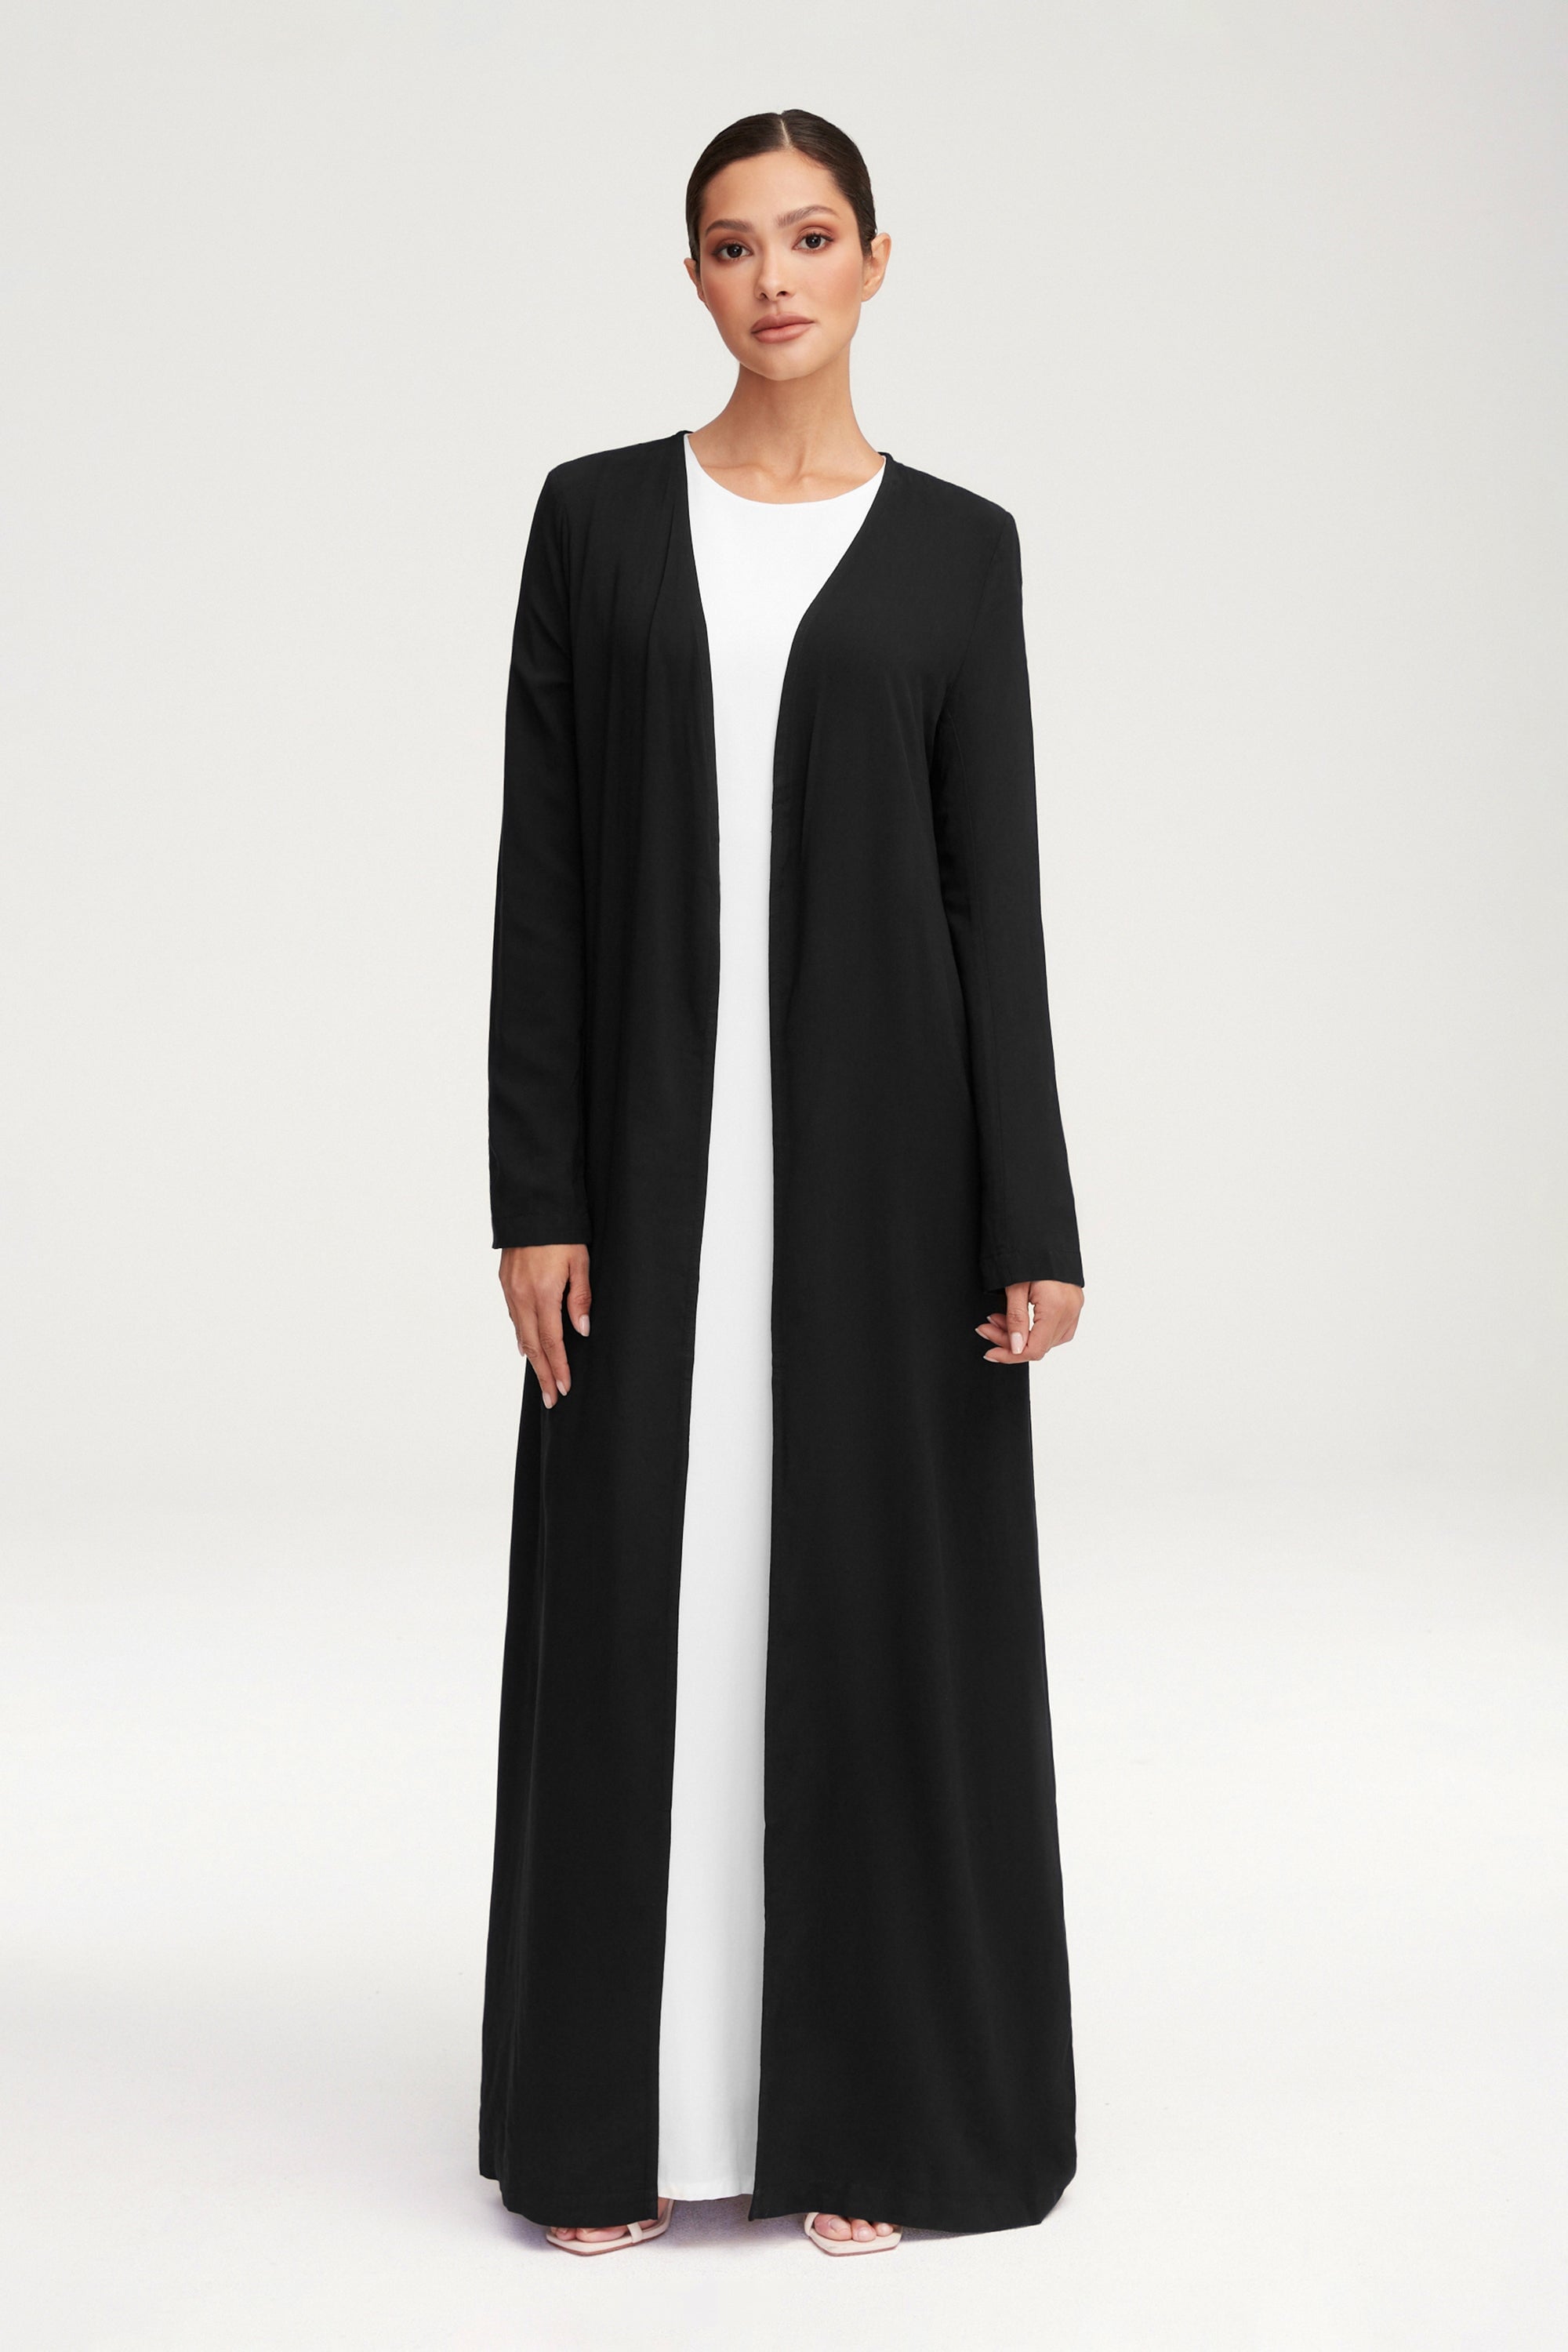 Essential Woven Open Abaya - Black Clothing Veiled 